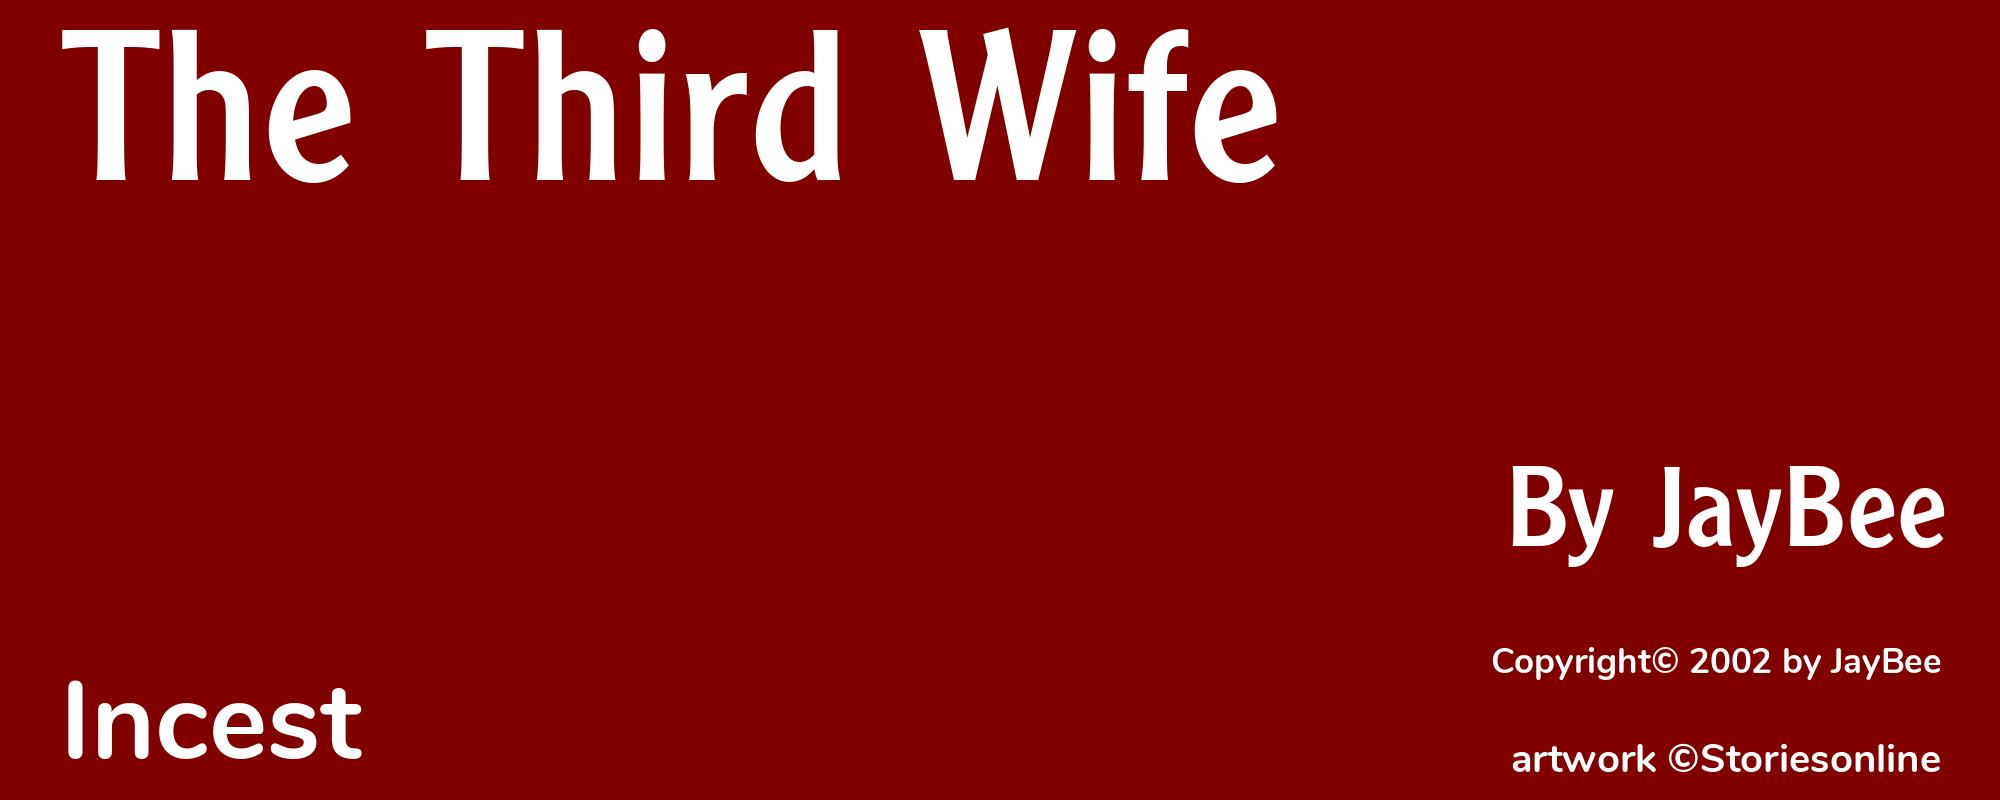 The Third Wife - Cover